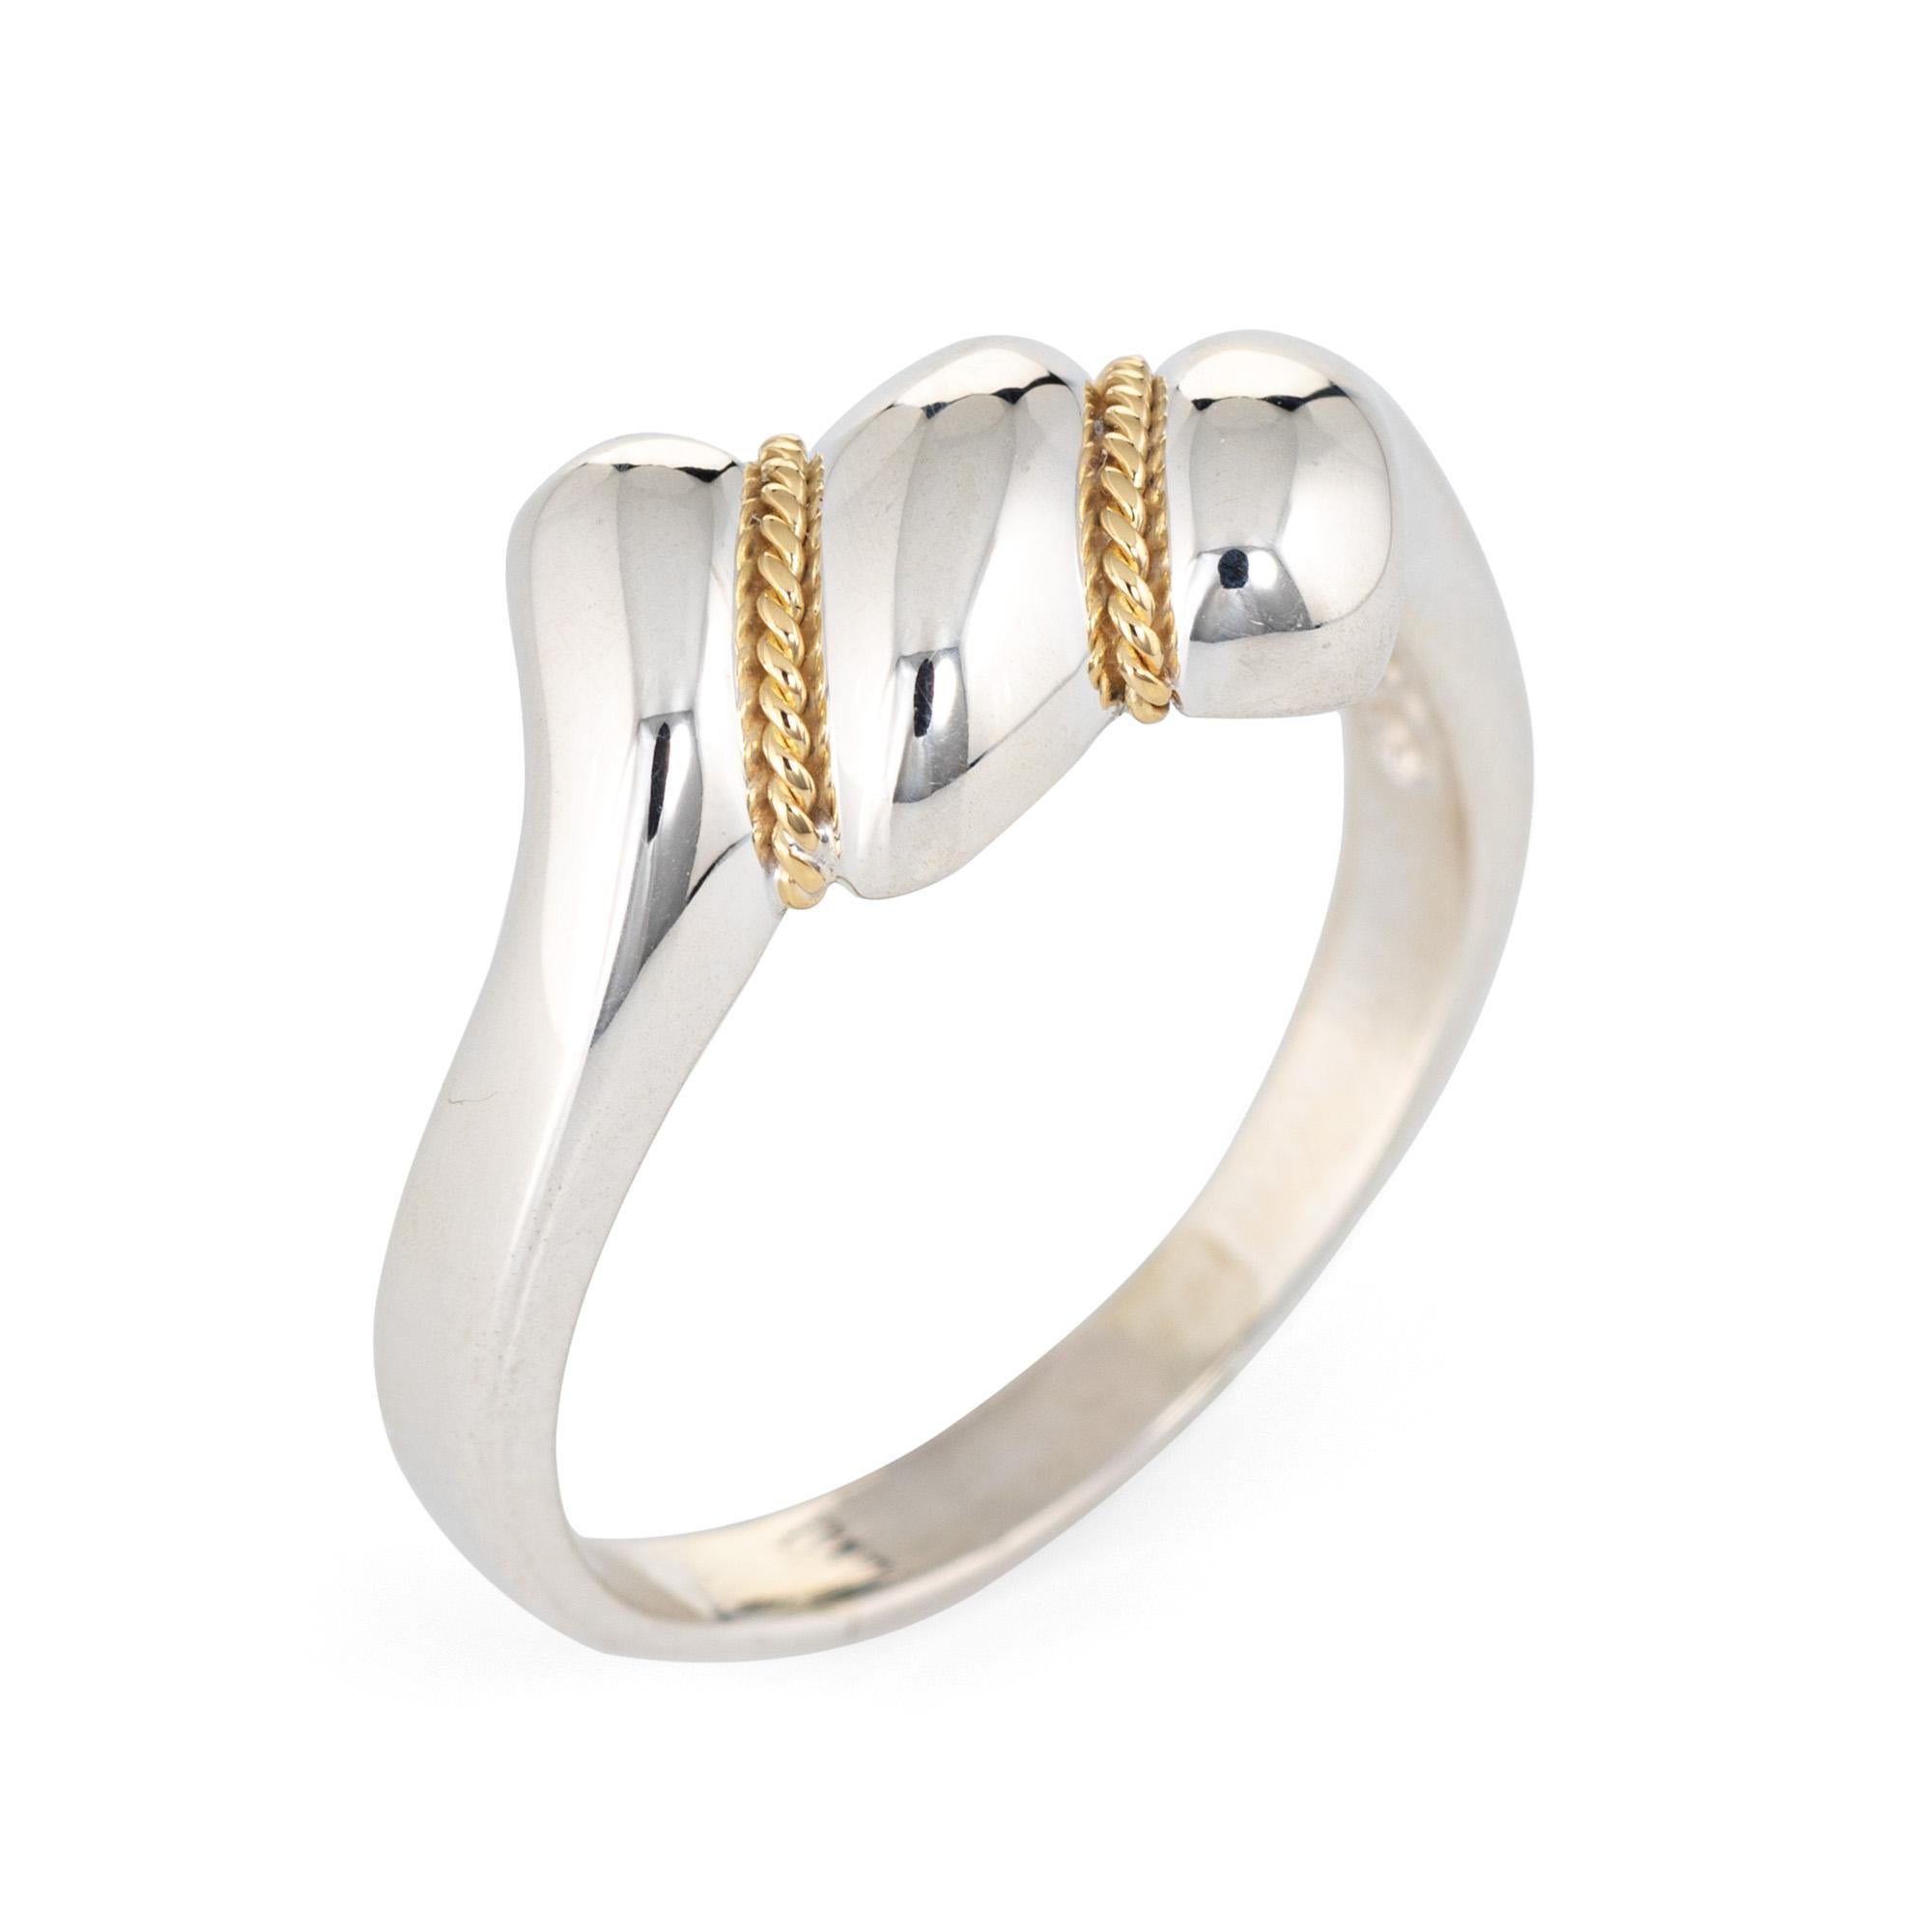 Finely detailed estate Tiffany & Co crafted in sterling silver & 18 karat yellow gold. 

The stylish ring features three low rise 'domes' with 18k yellow gold rope detail. The low rise ring (3.5mm - 0.13 inches) sits comfortably on the finger. 